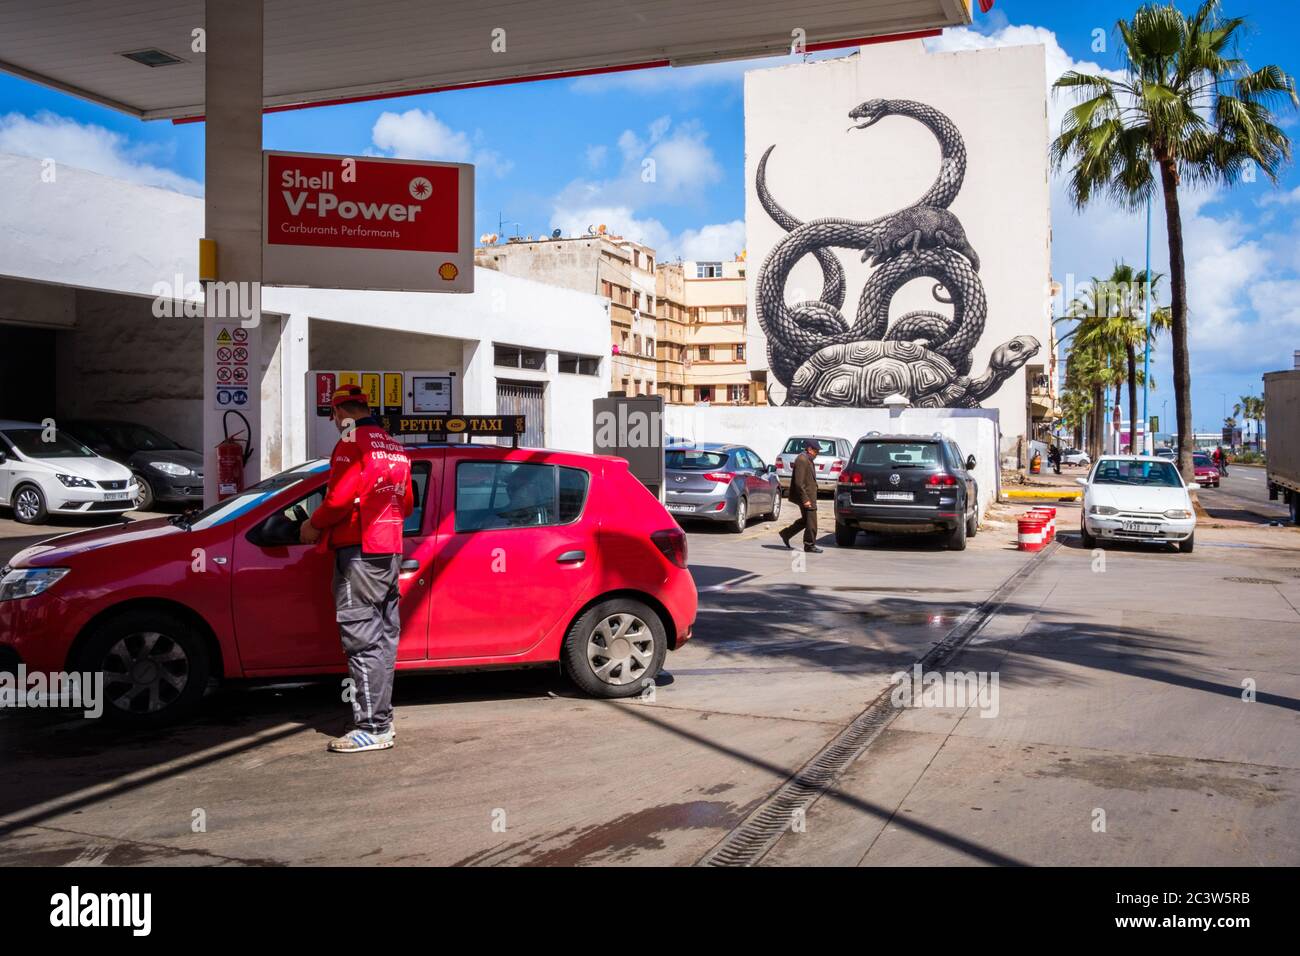 Morocco, Casablanca: Shell petrol station and mural in Zerktouni Boulevard. Mural depicting a turtle and a serpent, created by Roa, a Belgian artist. Stock Photo